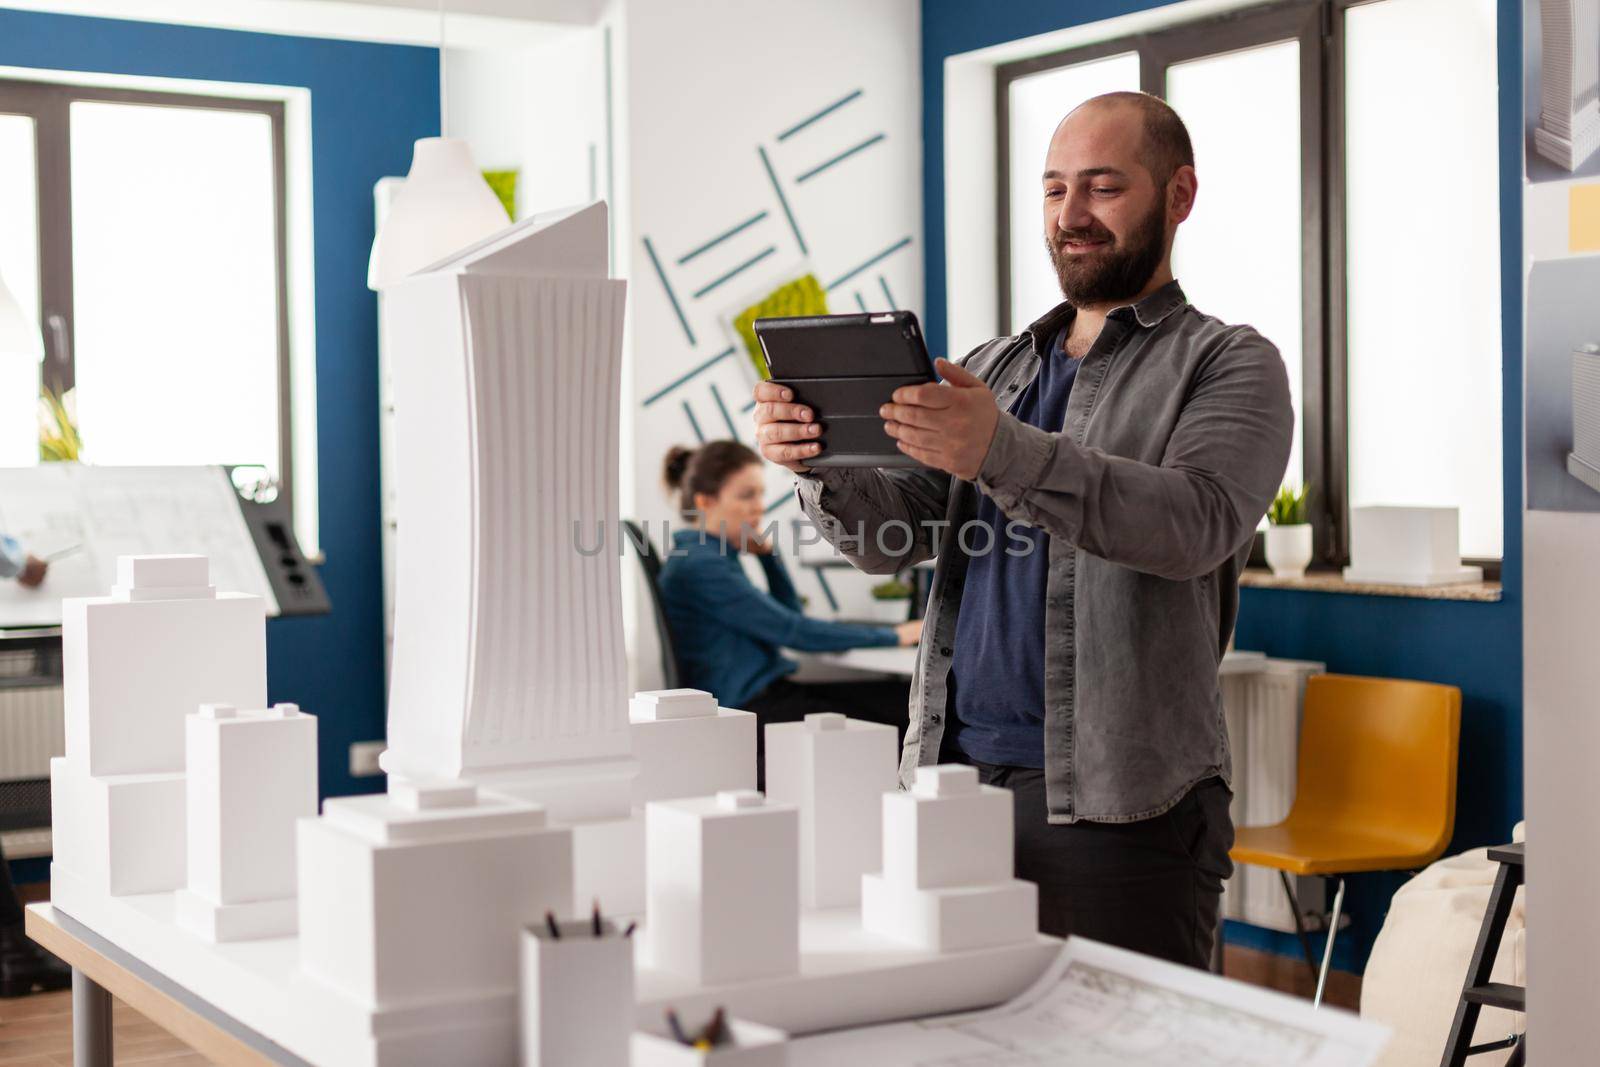 Bearded professional architect looking at tablet in front of white foam building model in architectural office. Engineer comparing blueprints on digital device with scale design of skyscraper.